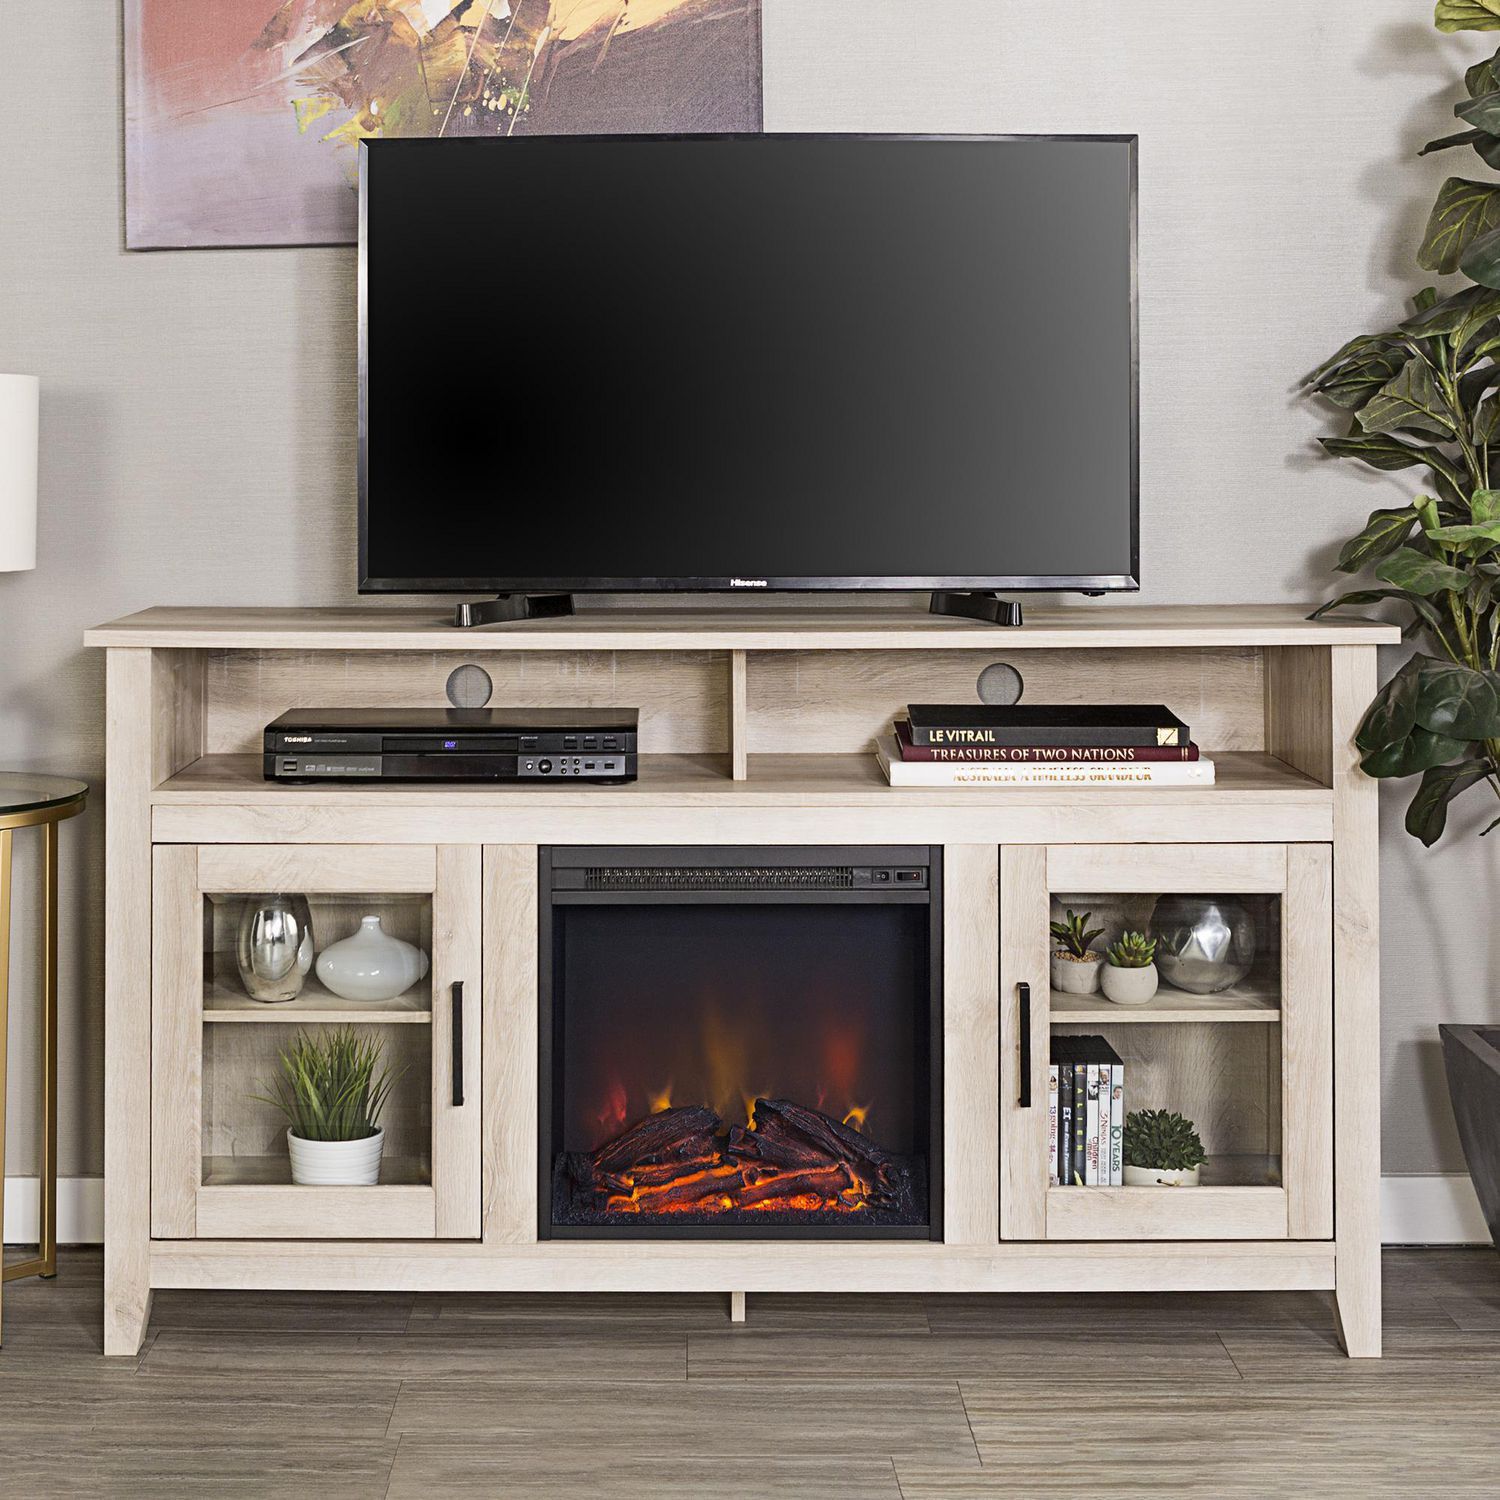 Manor Park 58" Wood Highboy Fireplace Media Tv Stand Console – White Throughout Wood Highboy Fireplace Tv Stands (View 8 of 20)